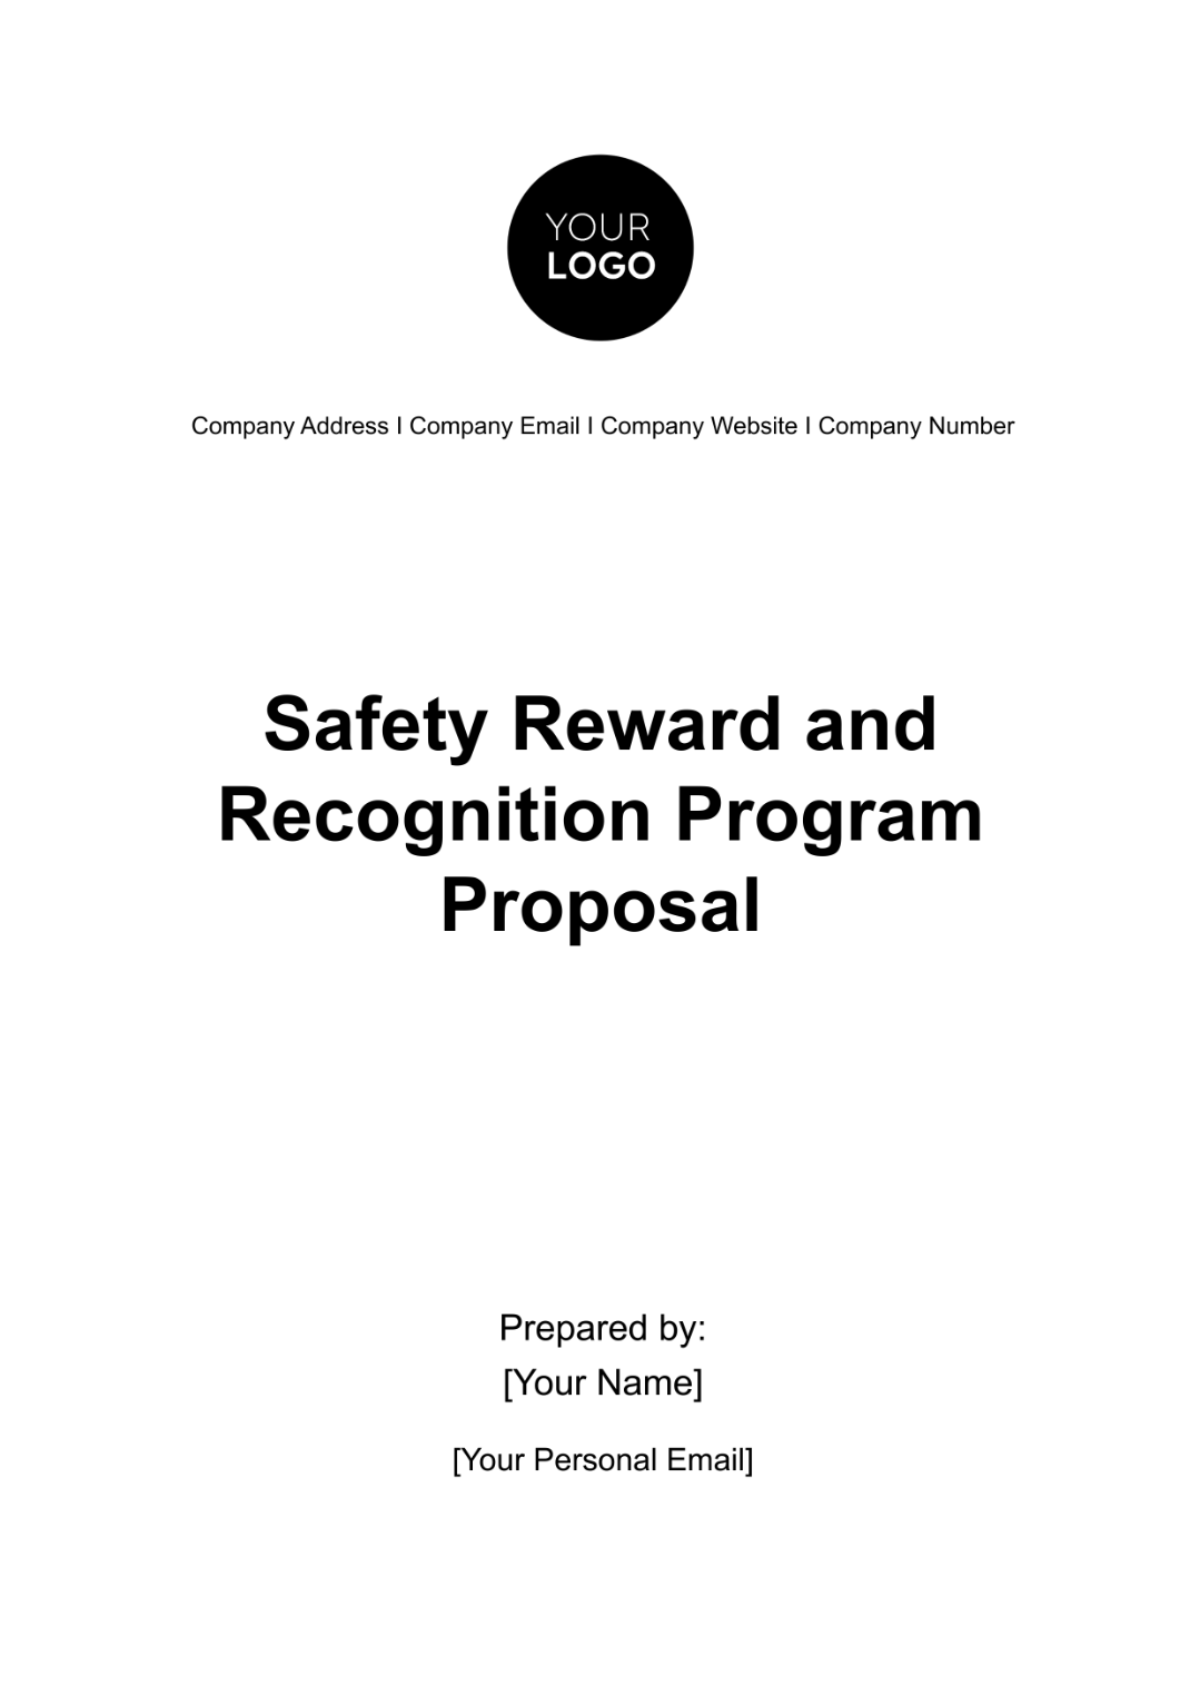 Safety Reward and Recognition Program Proposal HR Template